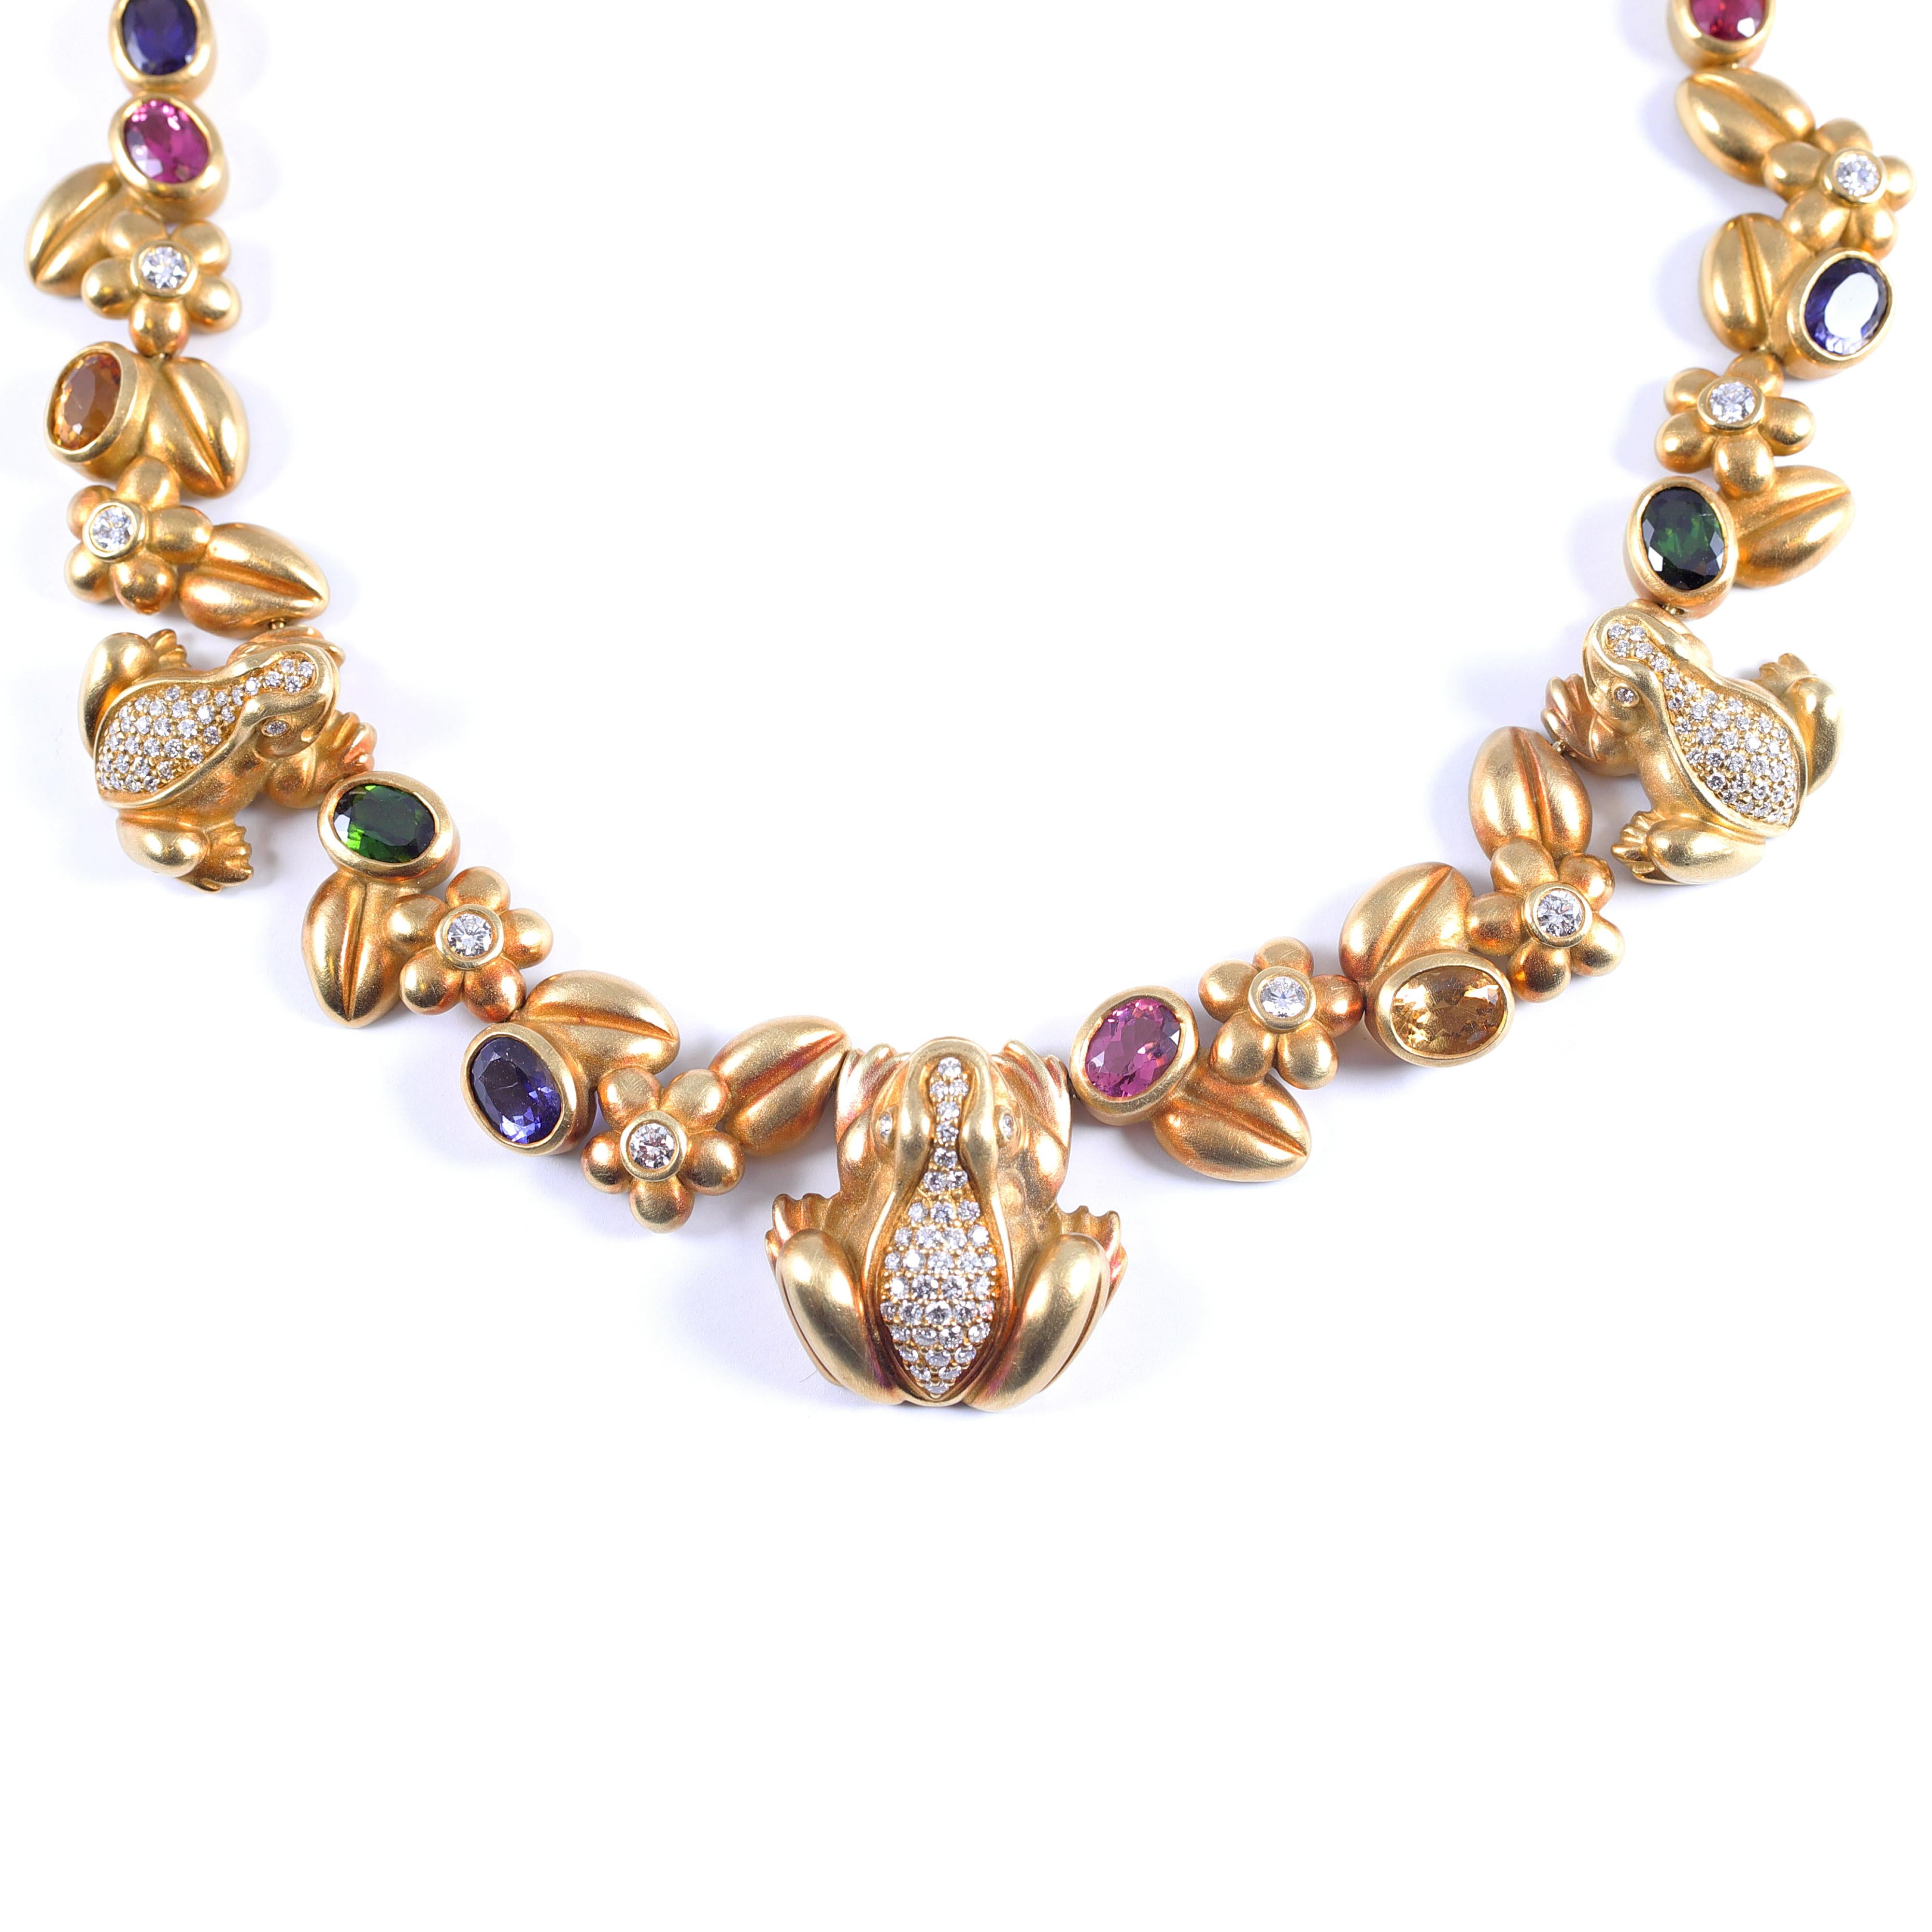 This necklace is from one of only four complete collections produced by famed designer Barry Cord of Kieselstein-Cord.  It is from the 